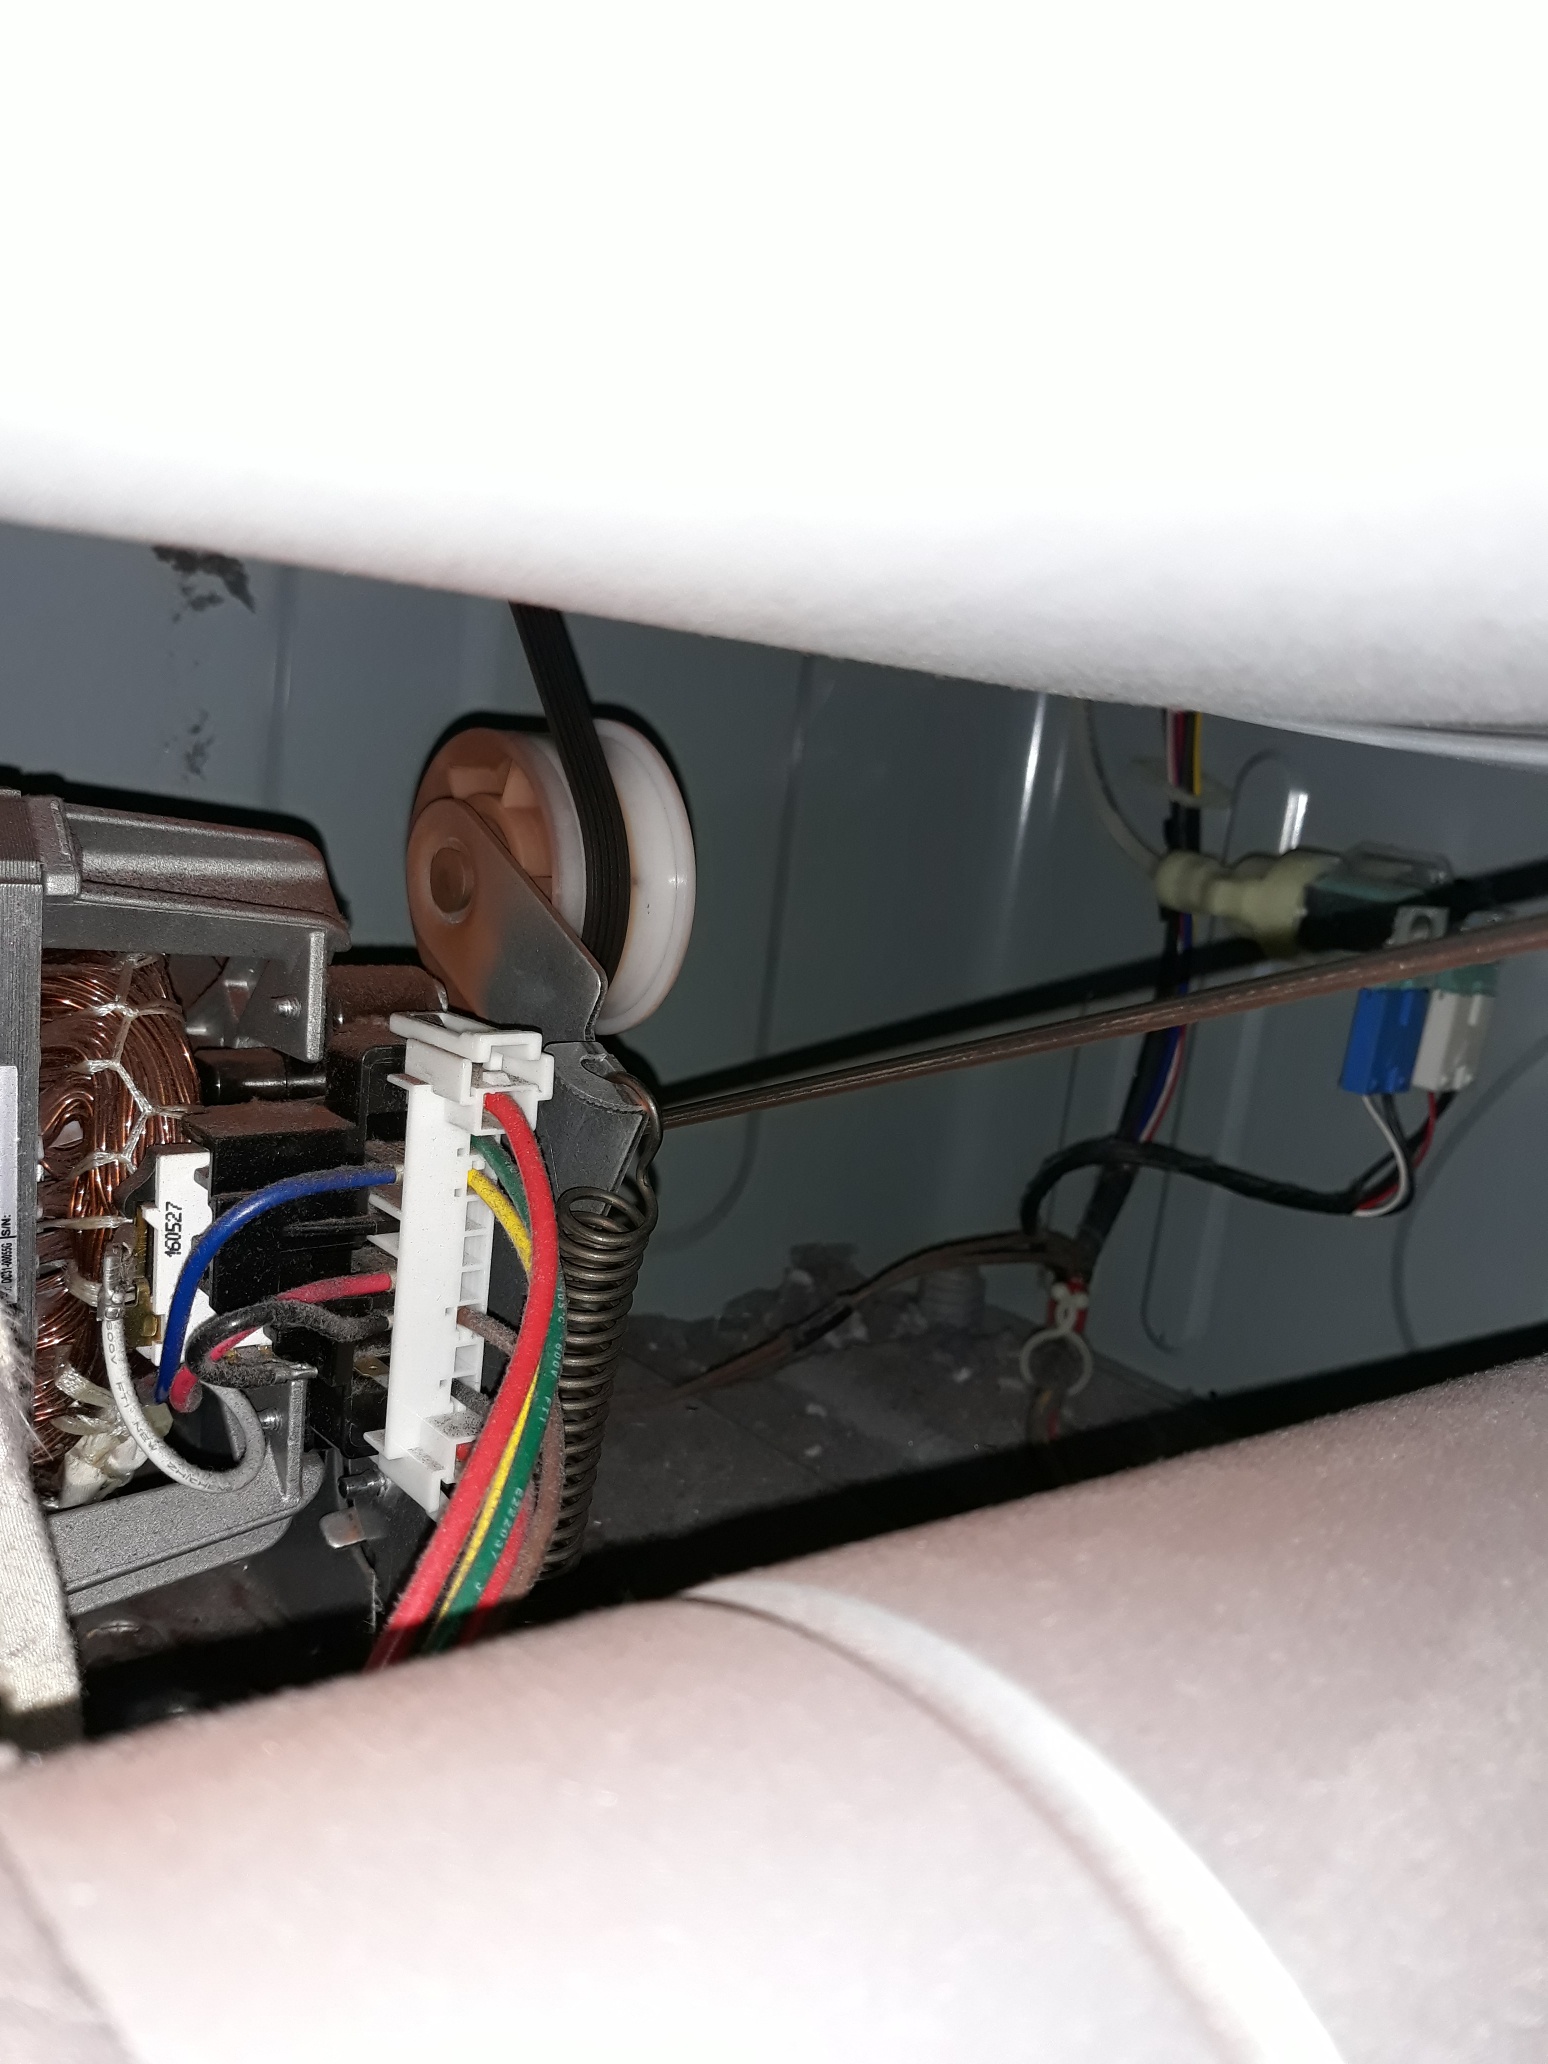 appliance repair dryer repair repair required replacement of the worn idler pulley assembly evans street coleman fl 33521